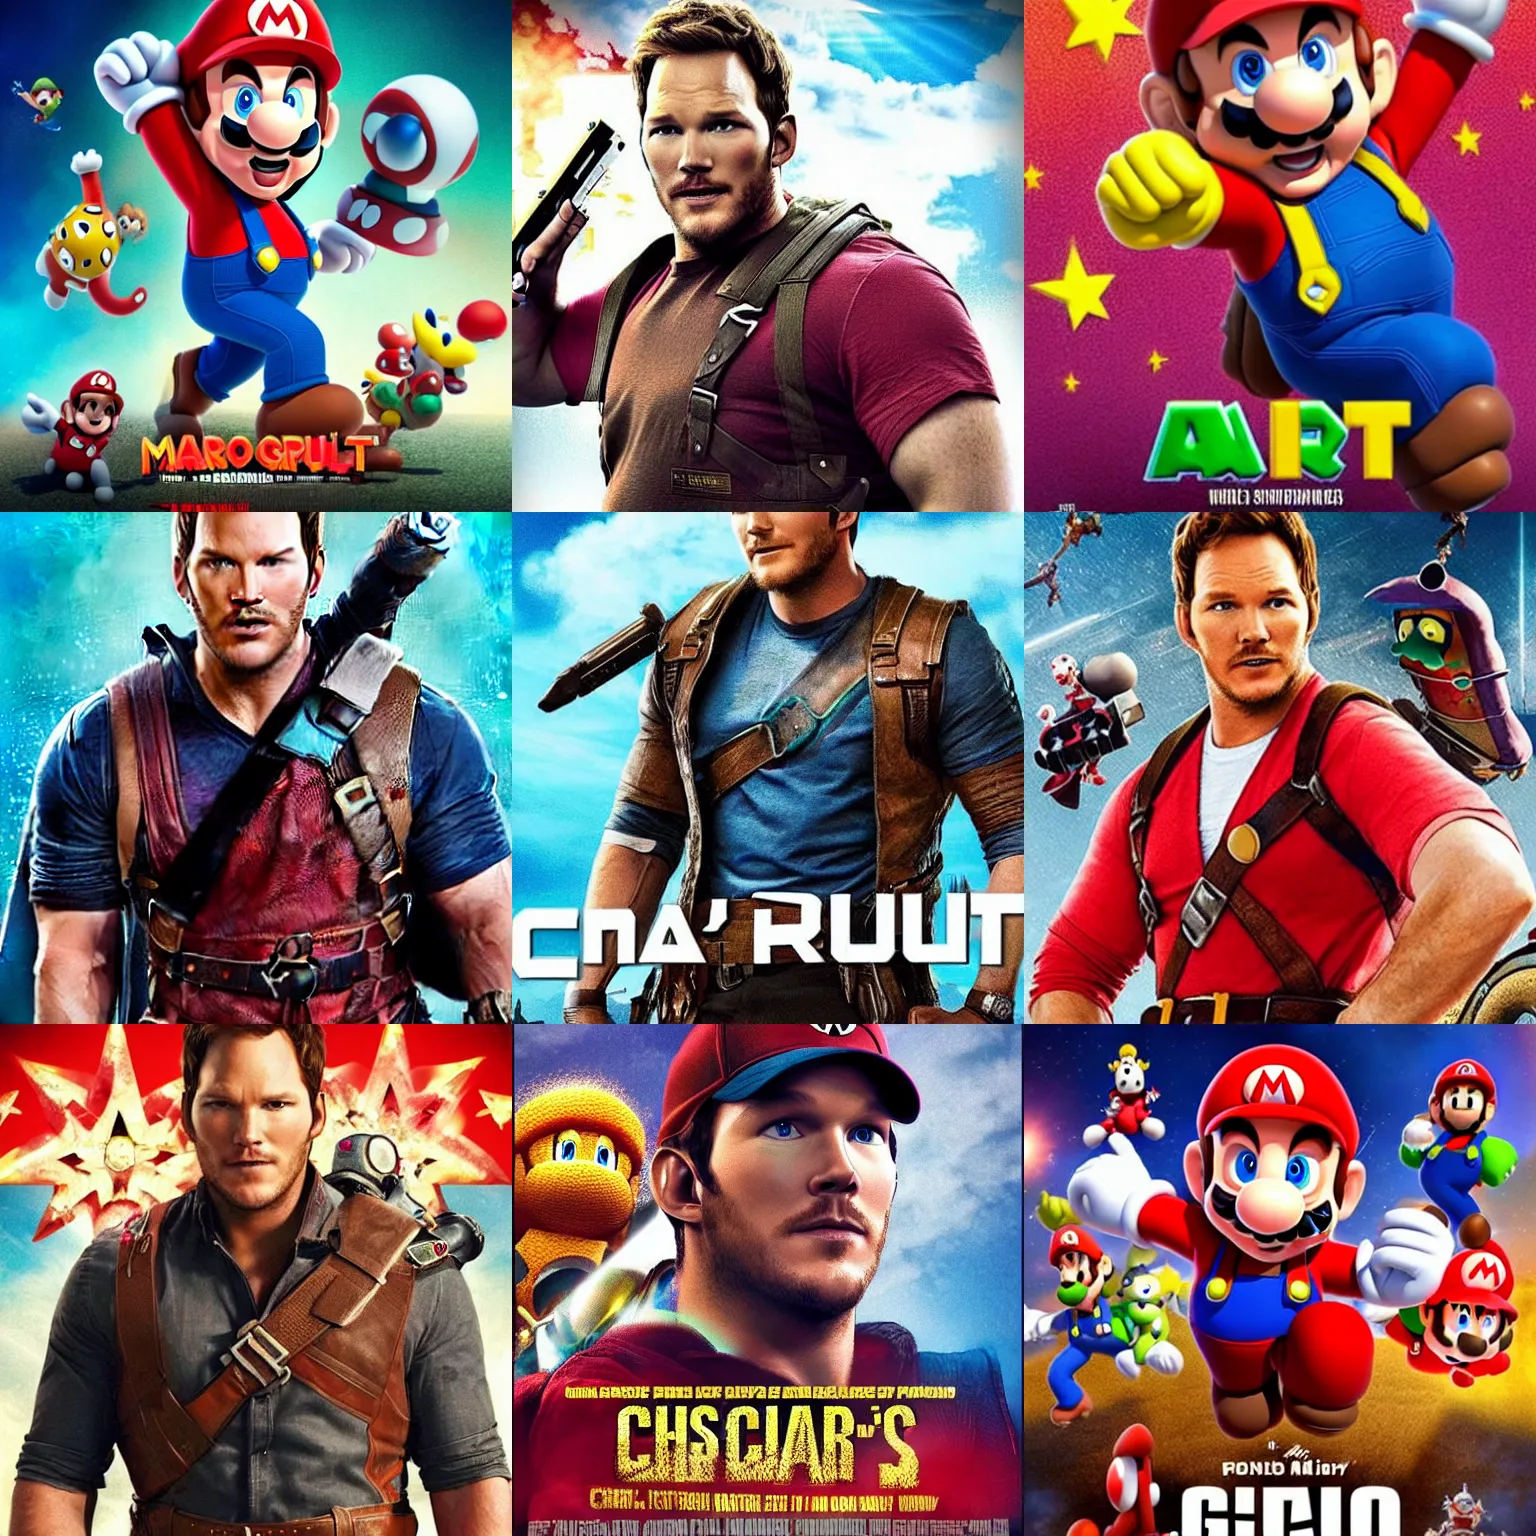 Prompt: chris pratt wearing mario's clothing in an upcoming movie, epic movie poster